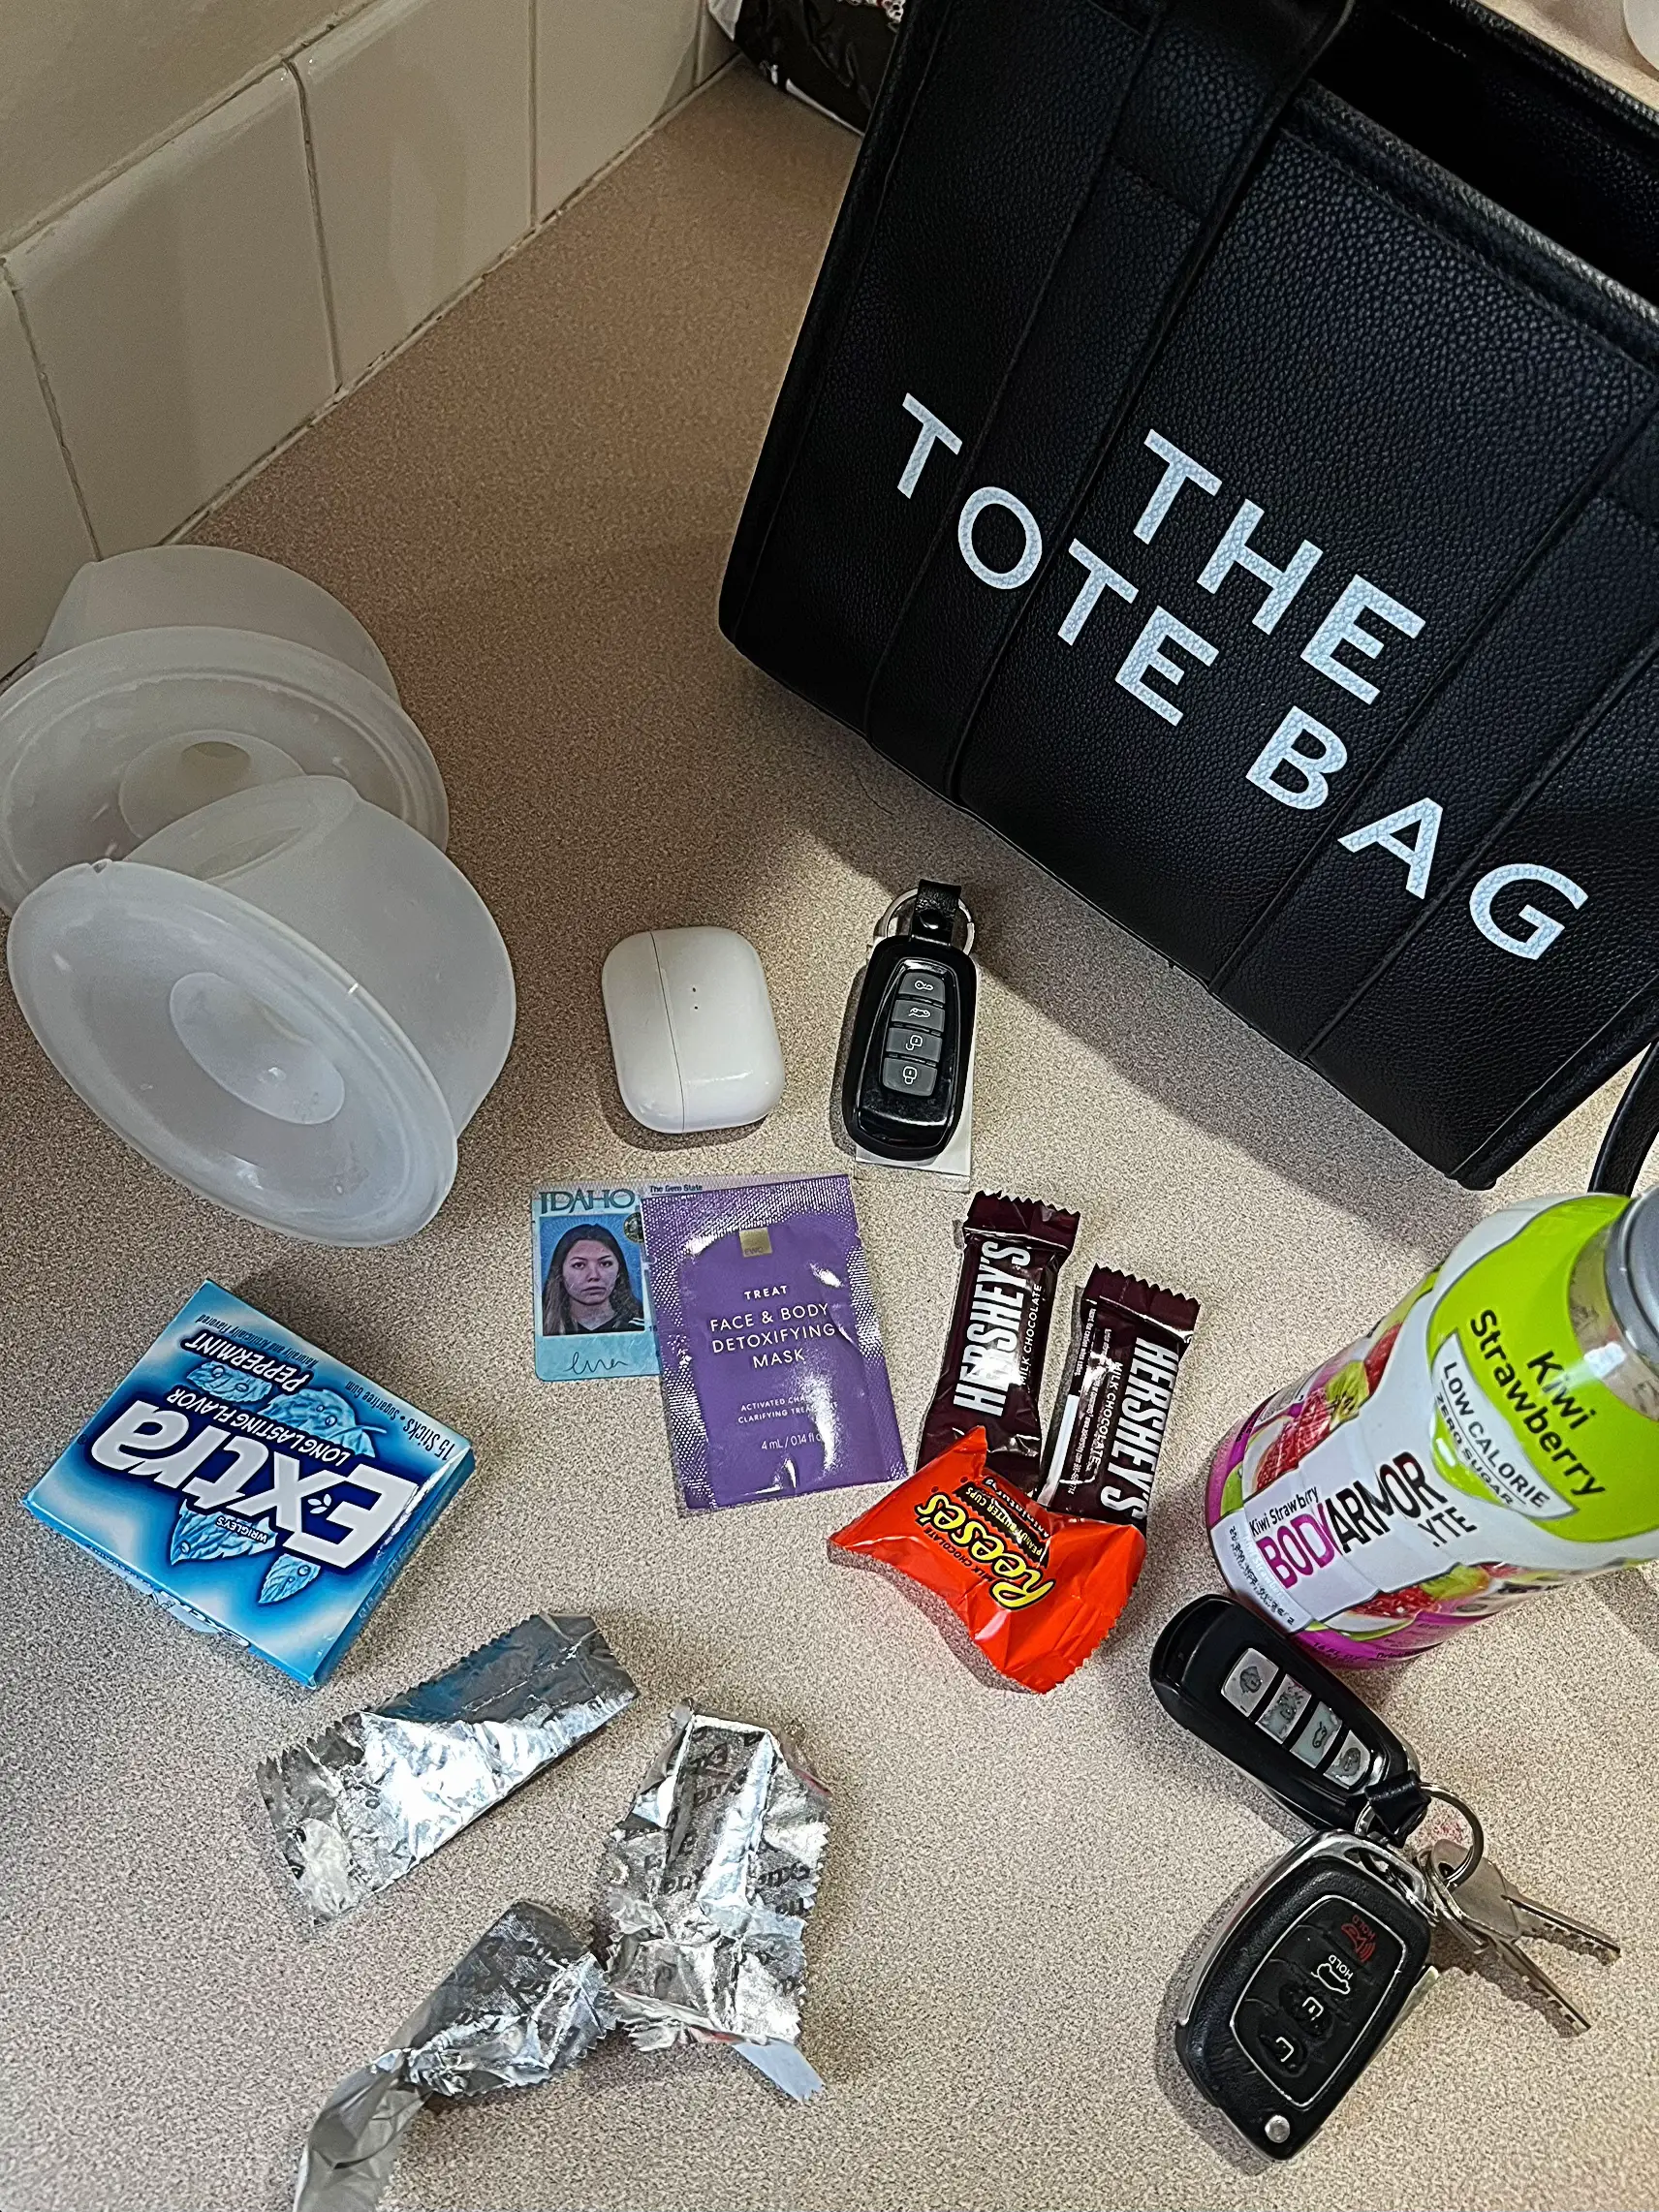 Pin on what's in my bag pics <3